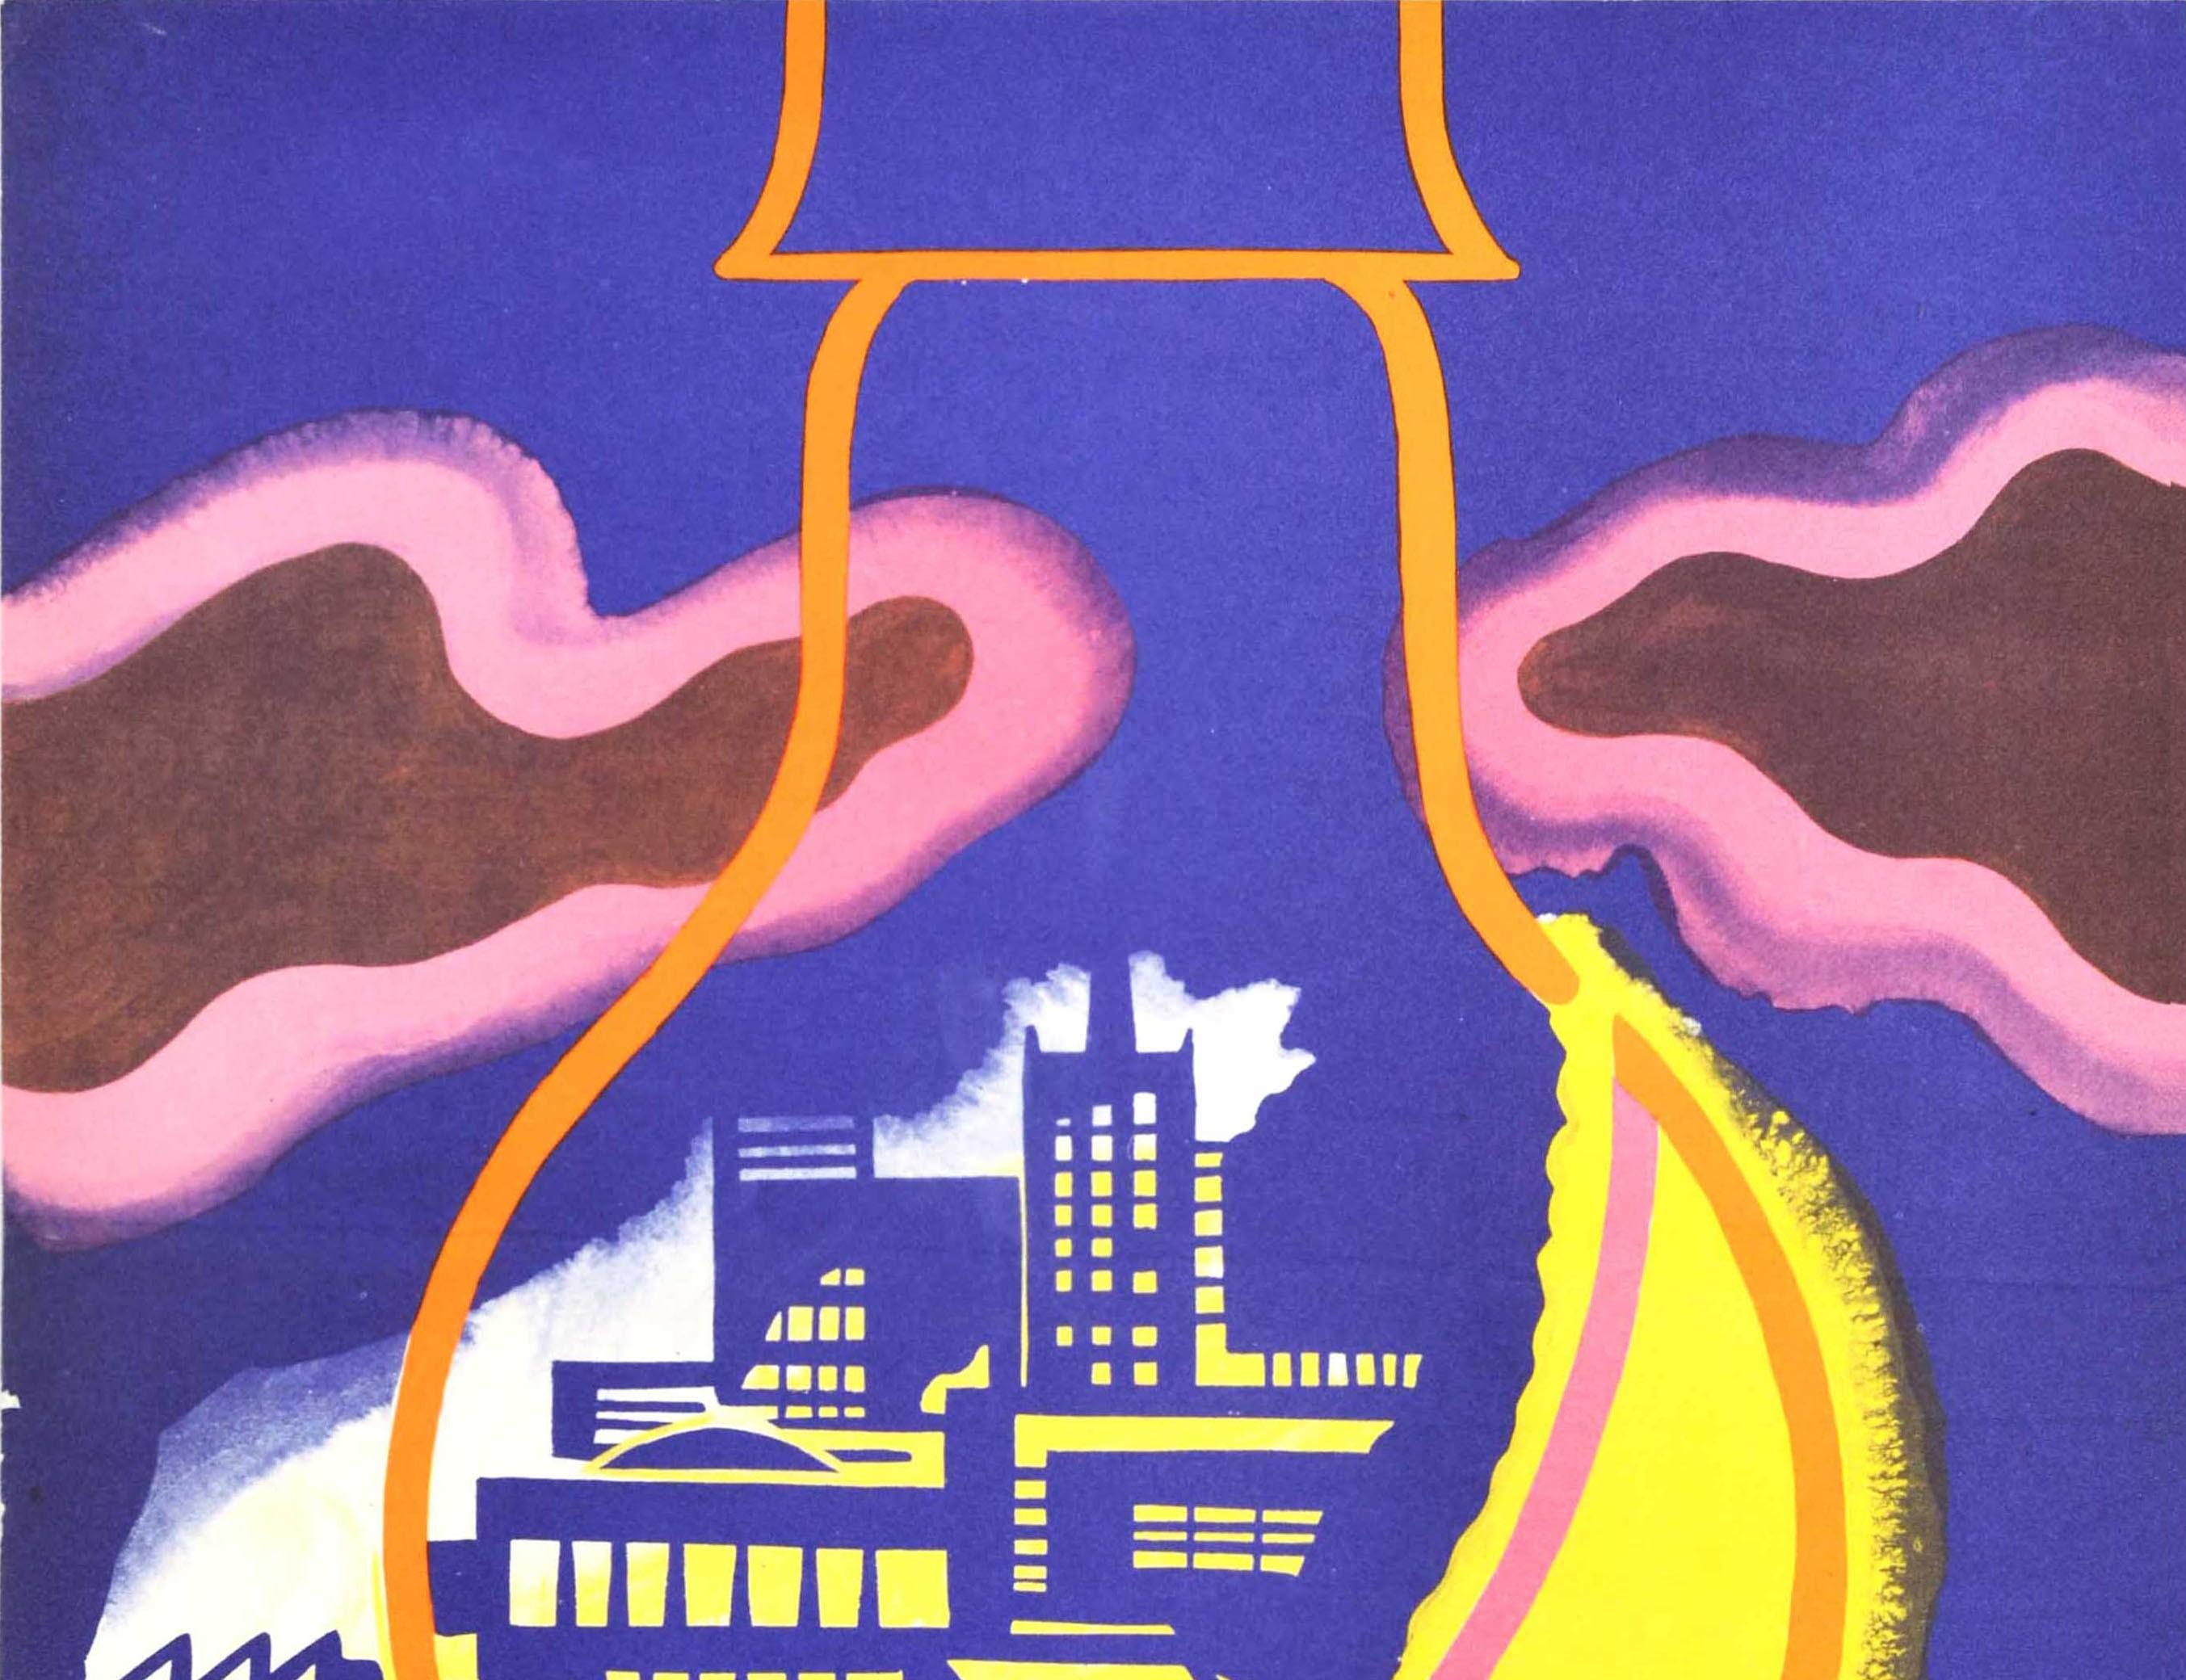 Original vintage Soviet propaganda poster to encourage energy savings featuring a great design depicting the shape of an electric light bulb forming a crescent moon in yellow with the lights on in buildings against the blue background, the bold text